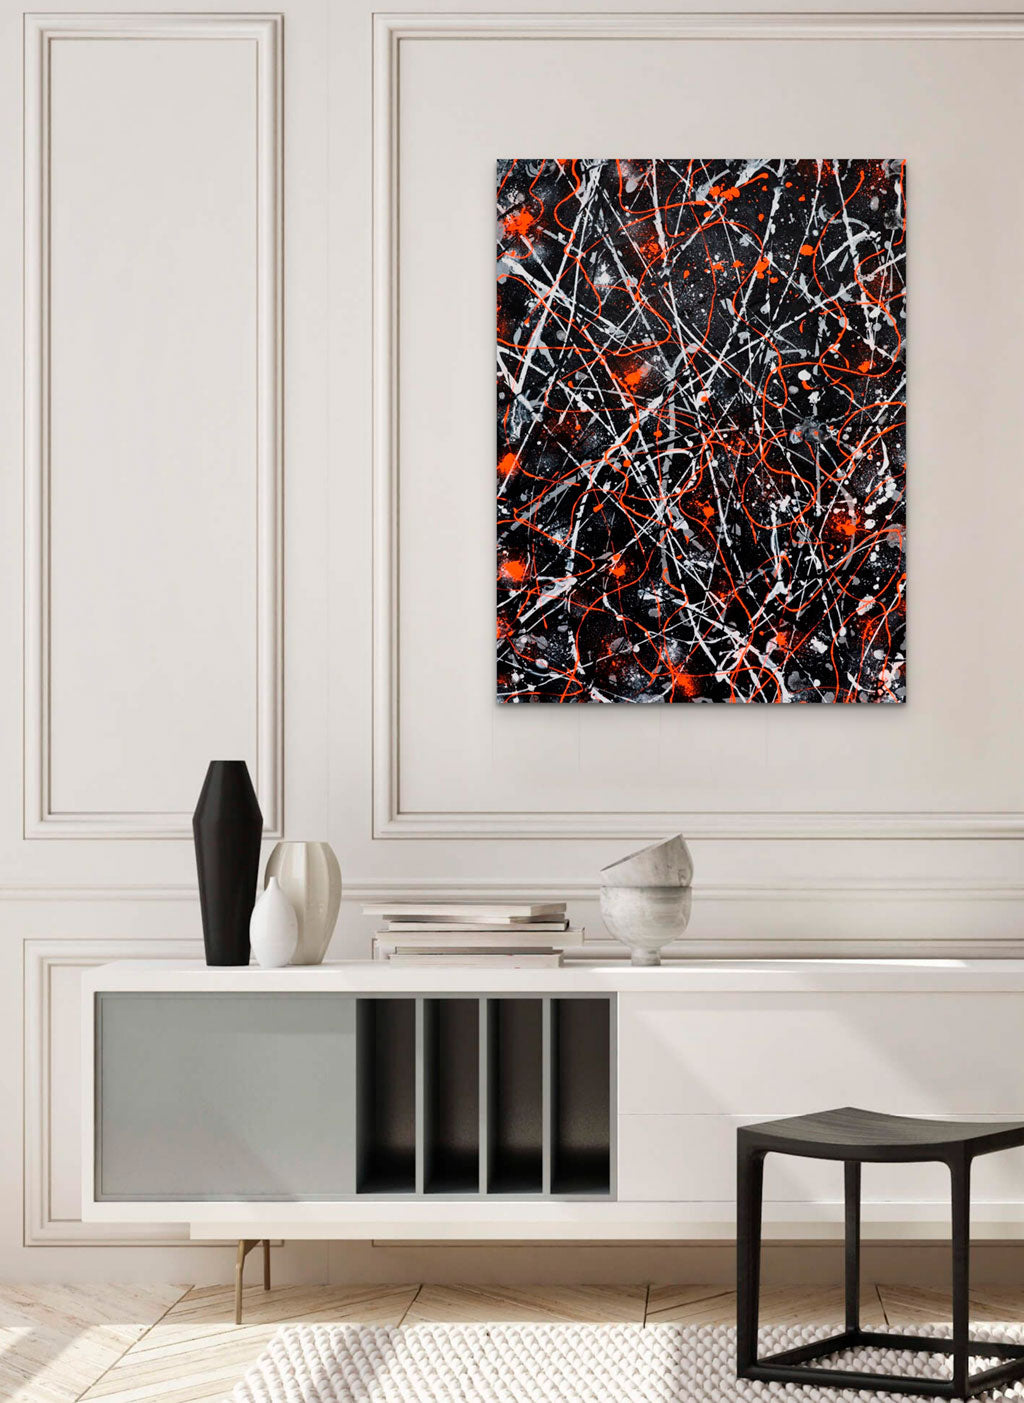 'Lava' original abstract expressionism painting on canvas seen hanging in situ above console with vases. Artwork, acrylic on canvas created by Bridget Bradley